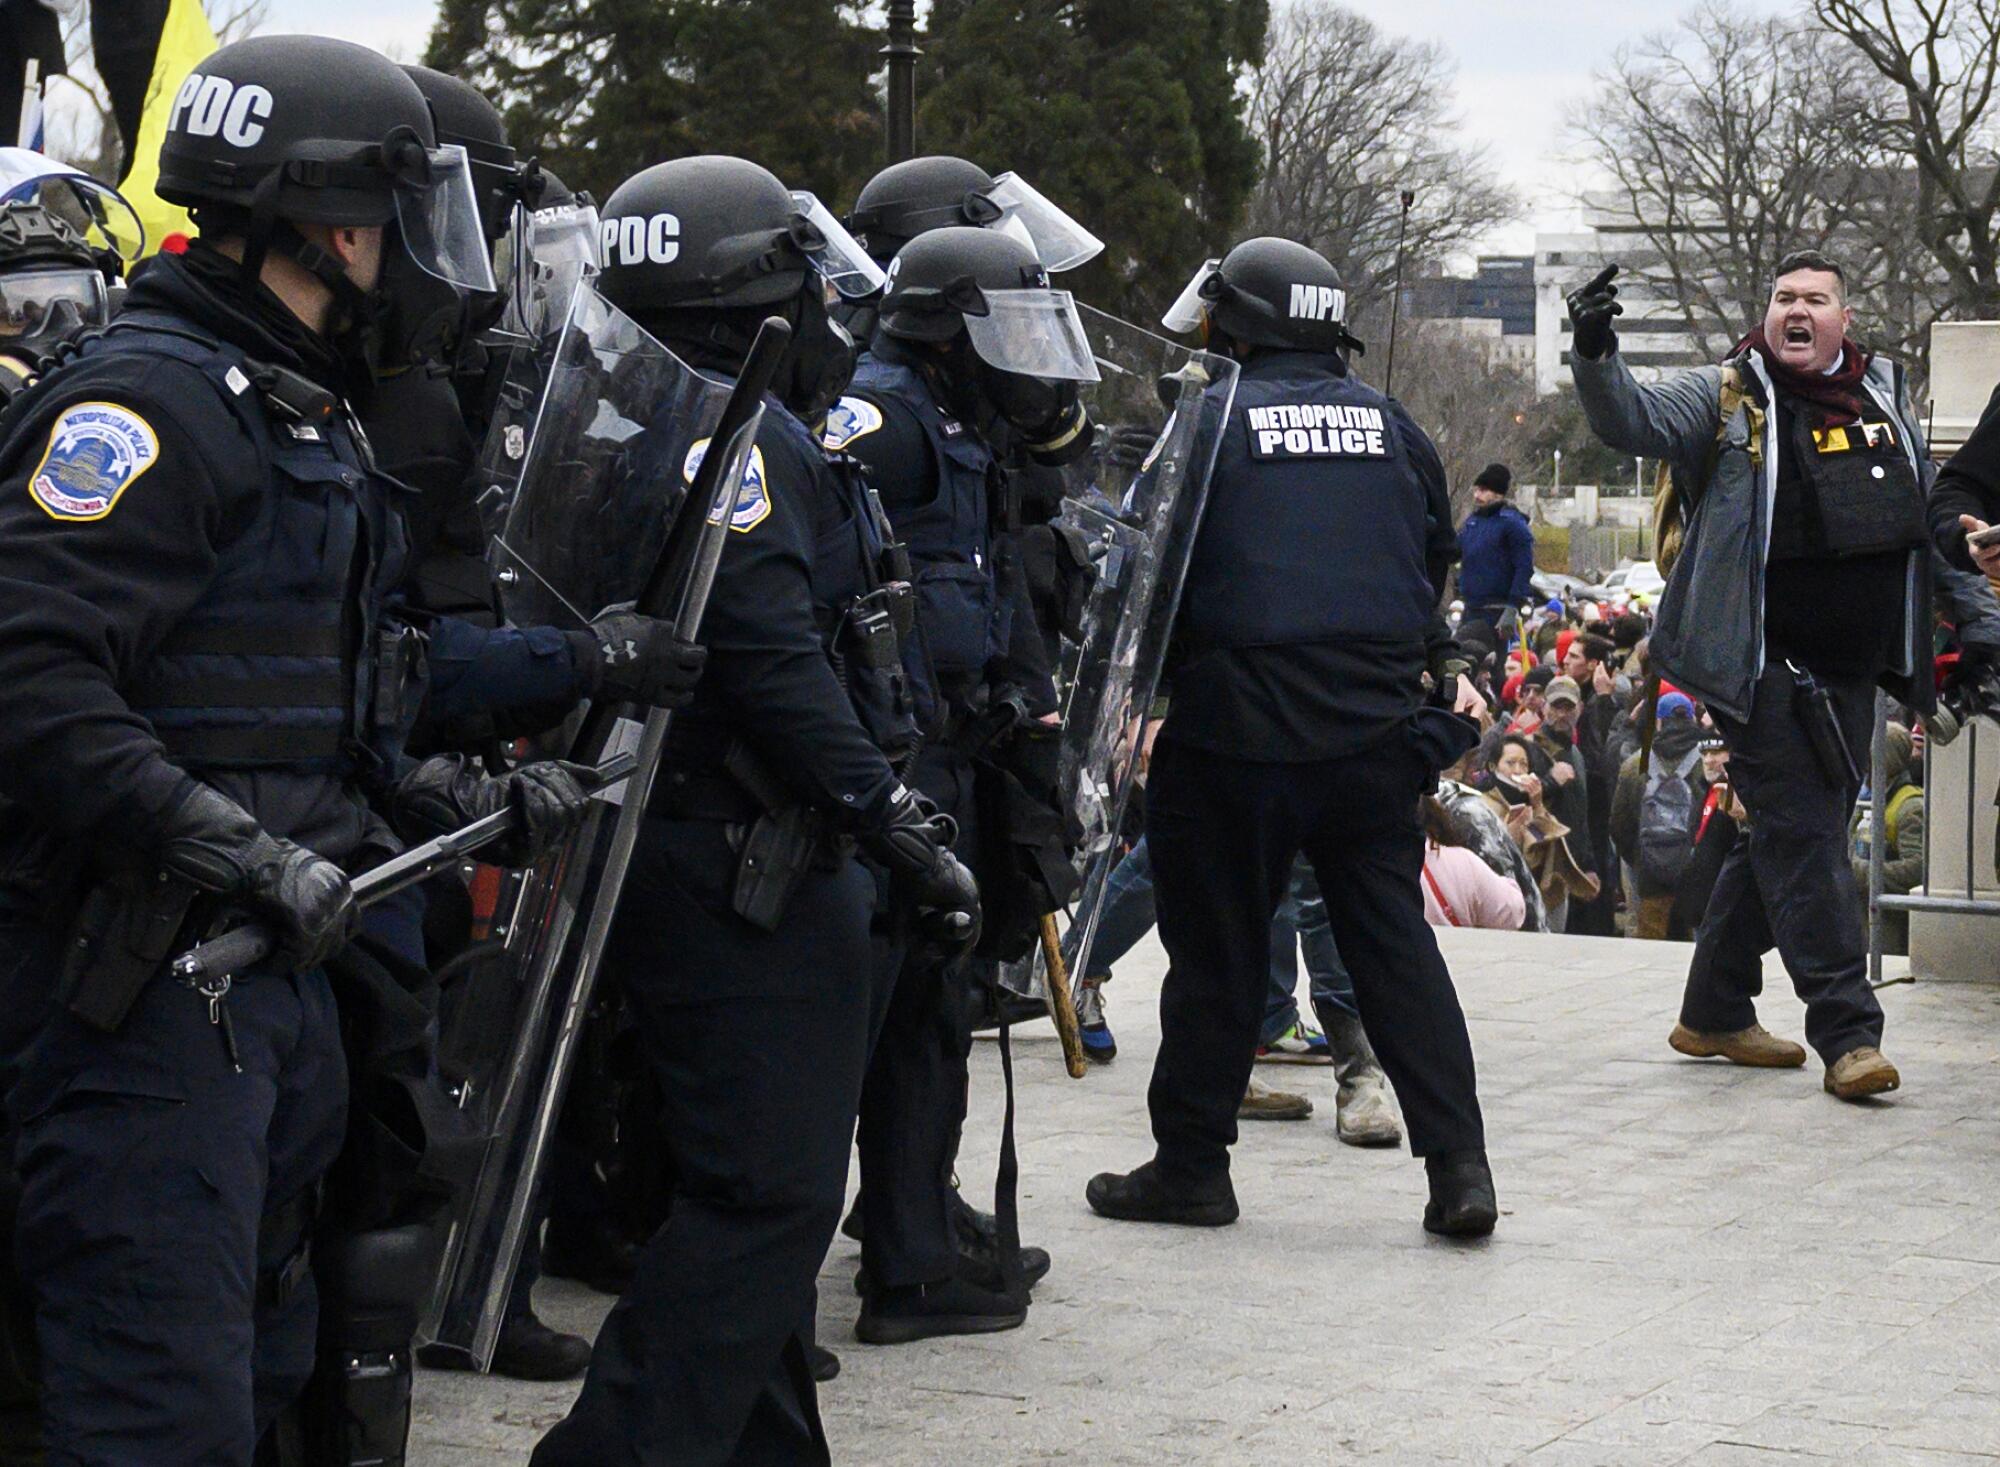 A line of police in riot gear next to a man walking by gesturing with his middle finger toward them